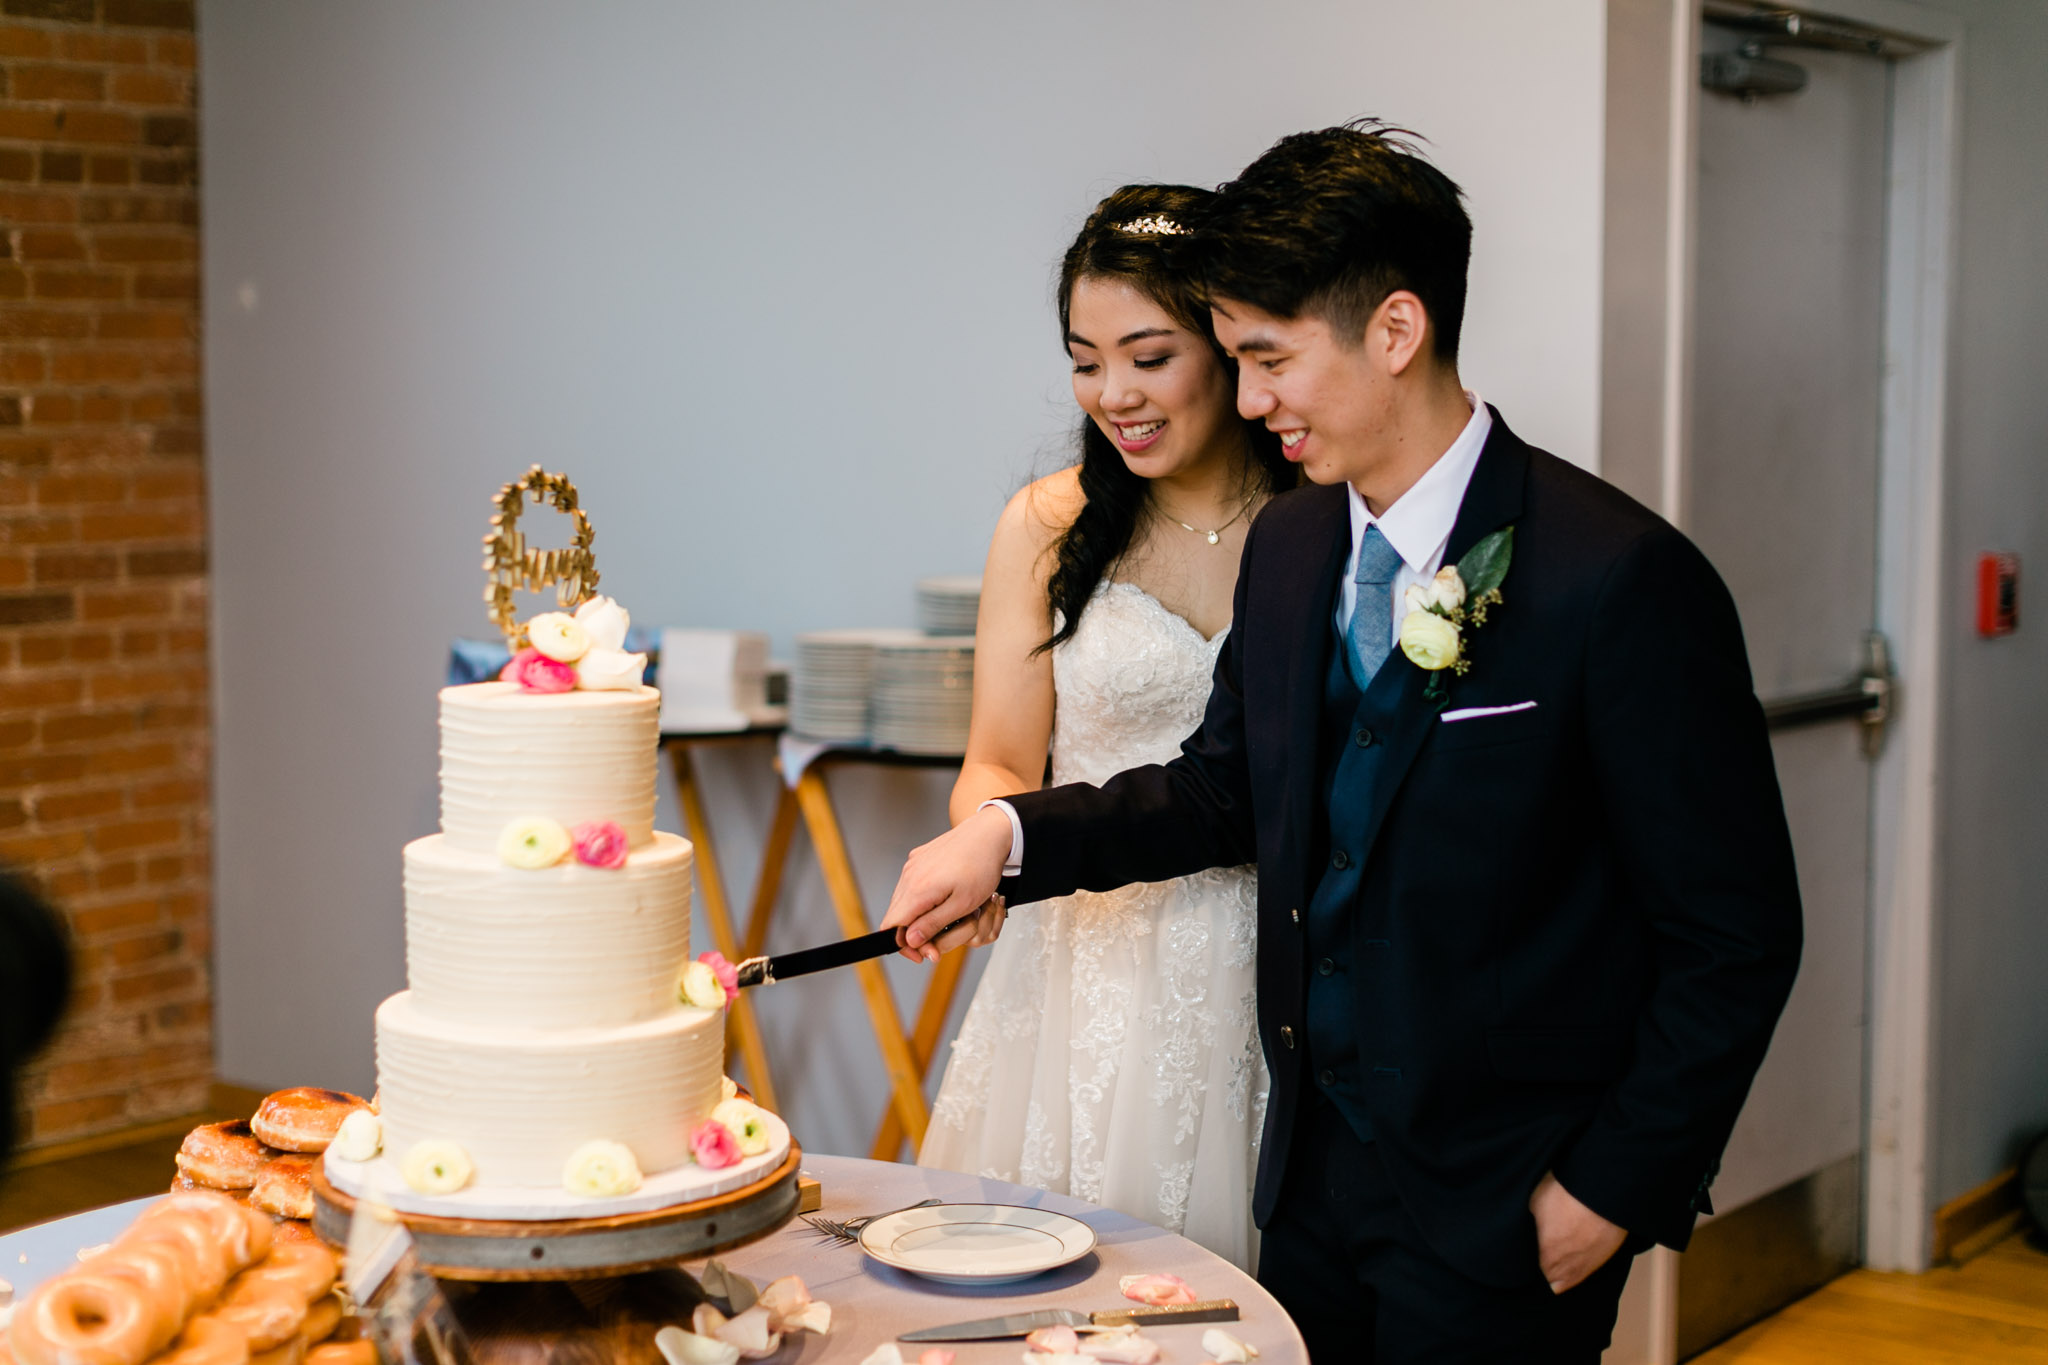 Bride and groom cutting the cake | Durham Wedding Photography | The Cotton Room | By G. Lin Photography